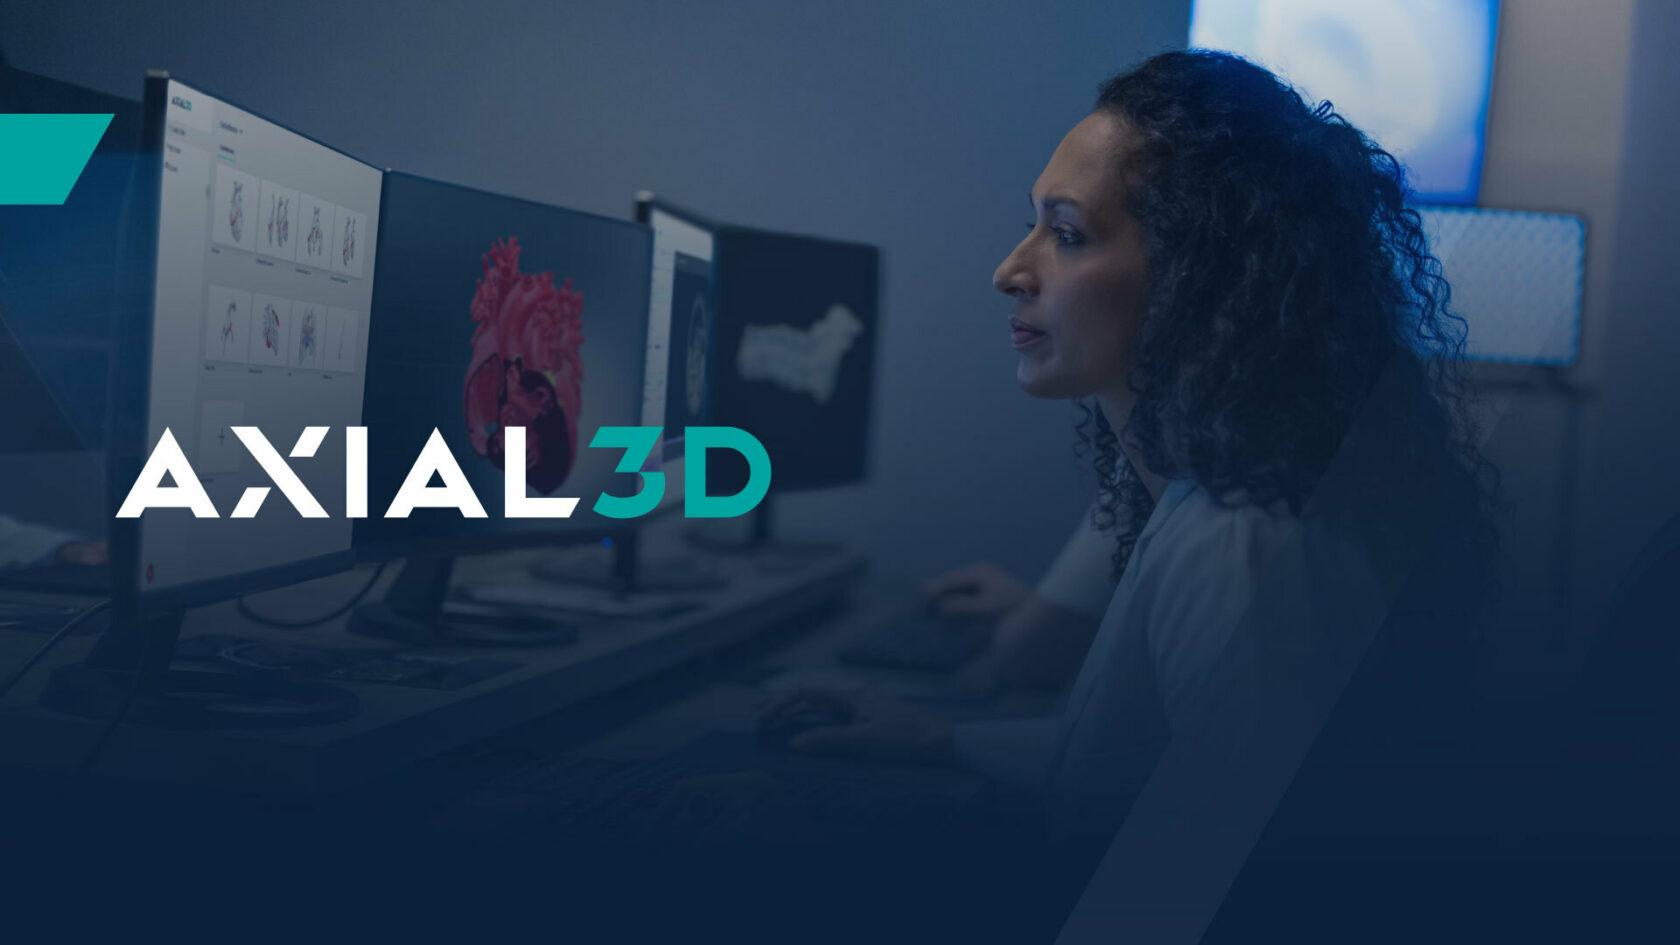 Axial3d ux and identity